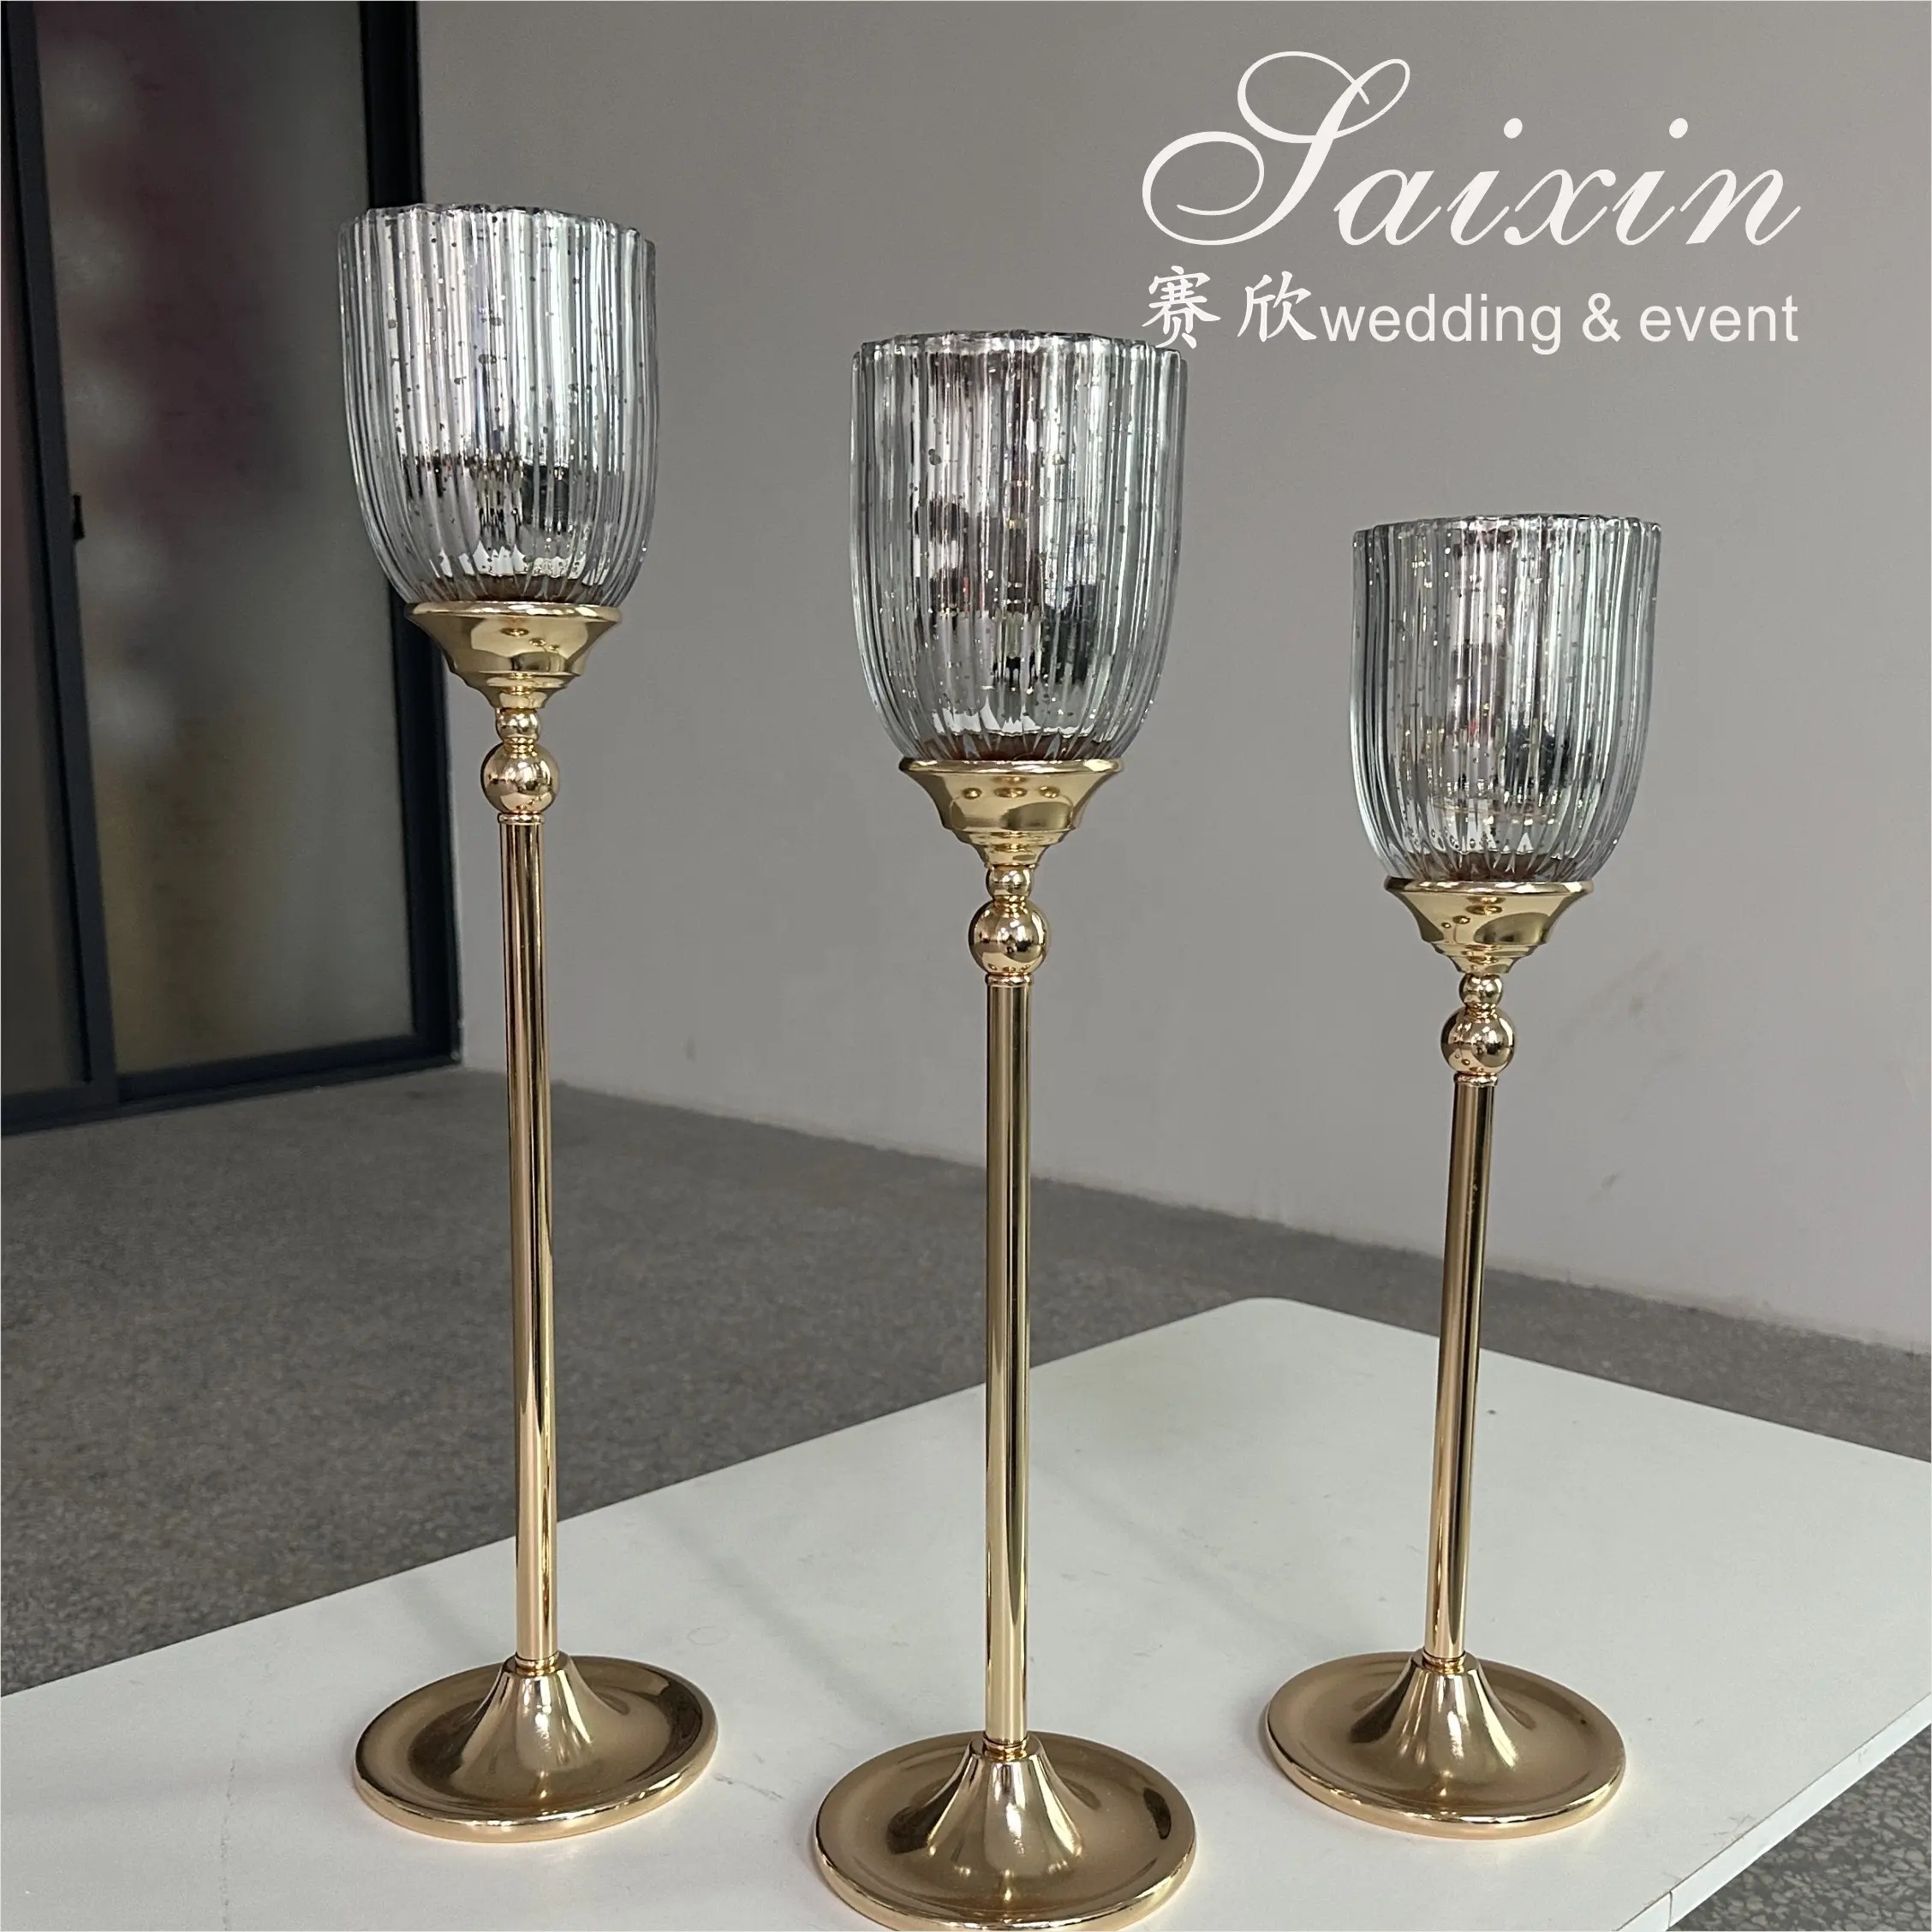 Hot Sale Wedding Decoration Candlestick 3 Pcs Gold Candle Holder With Silver Globes